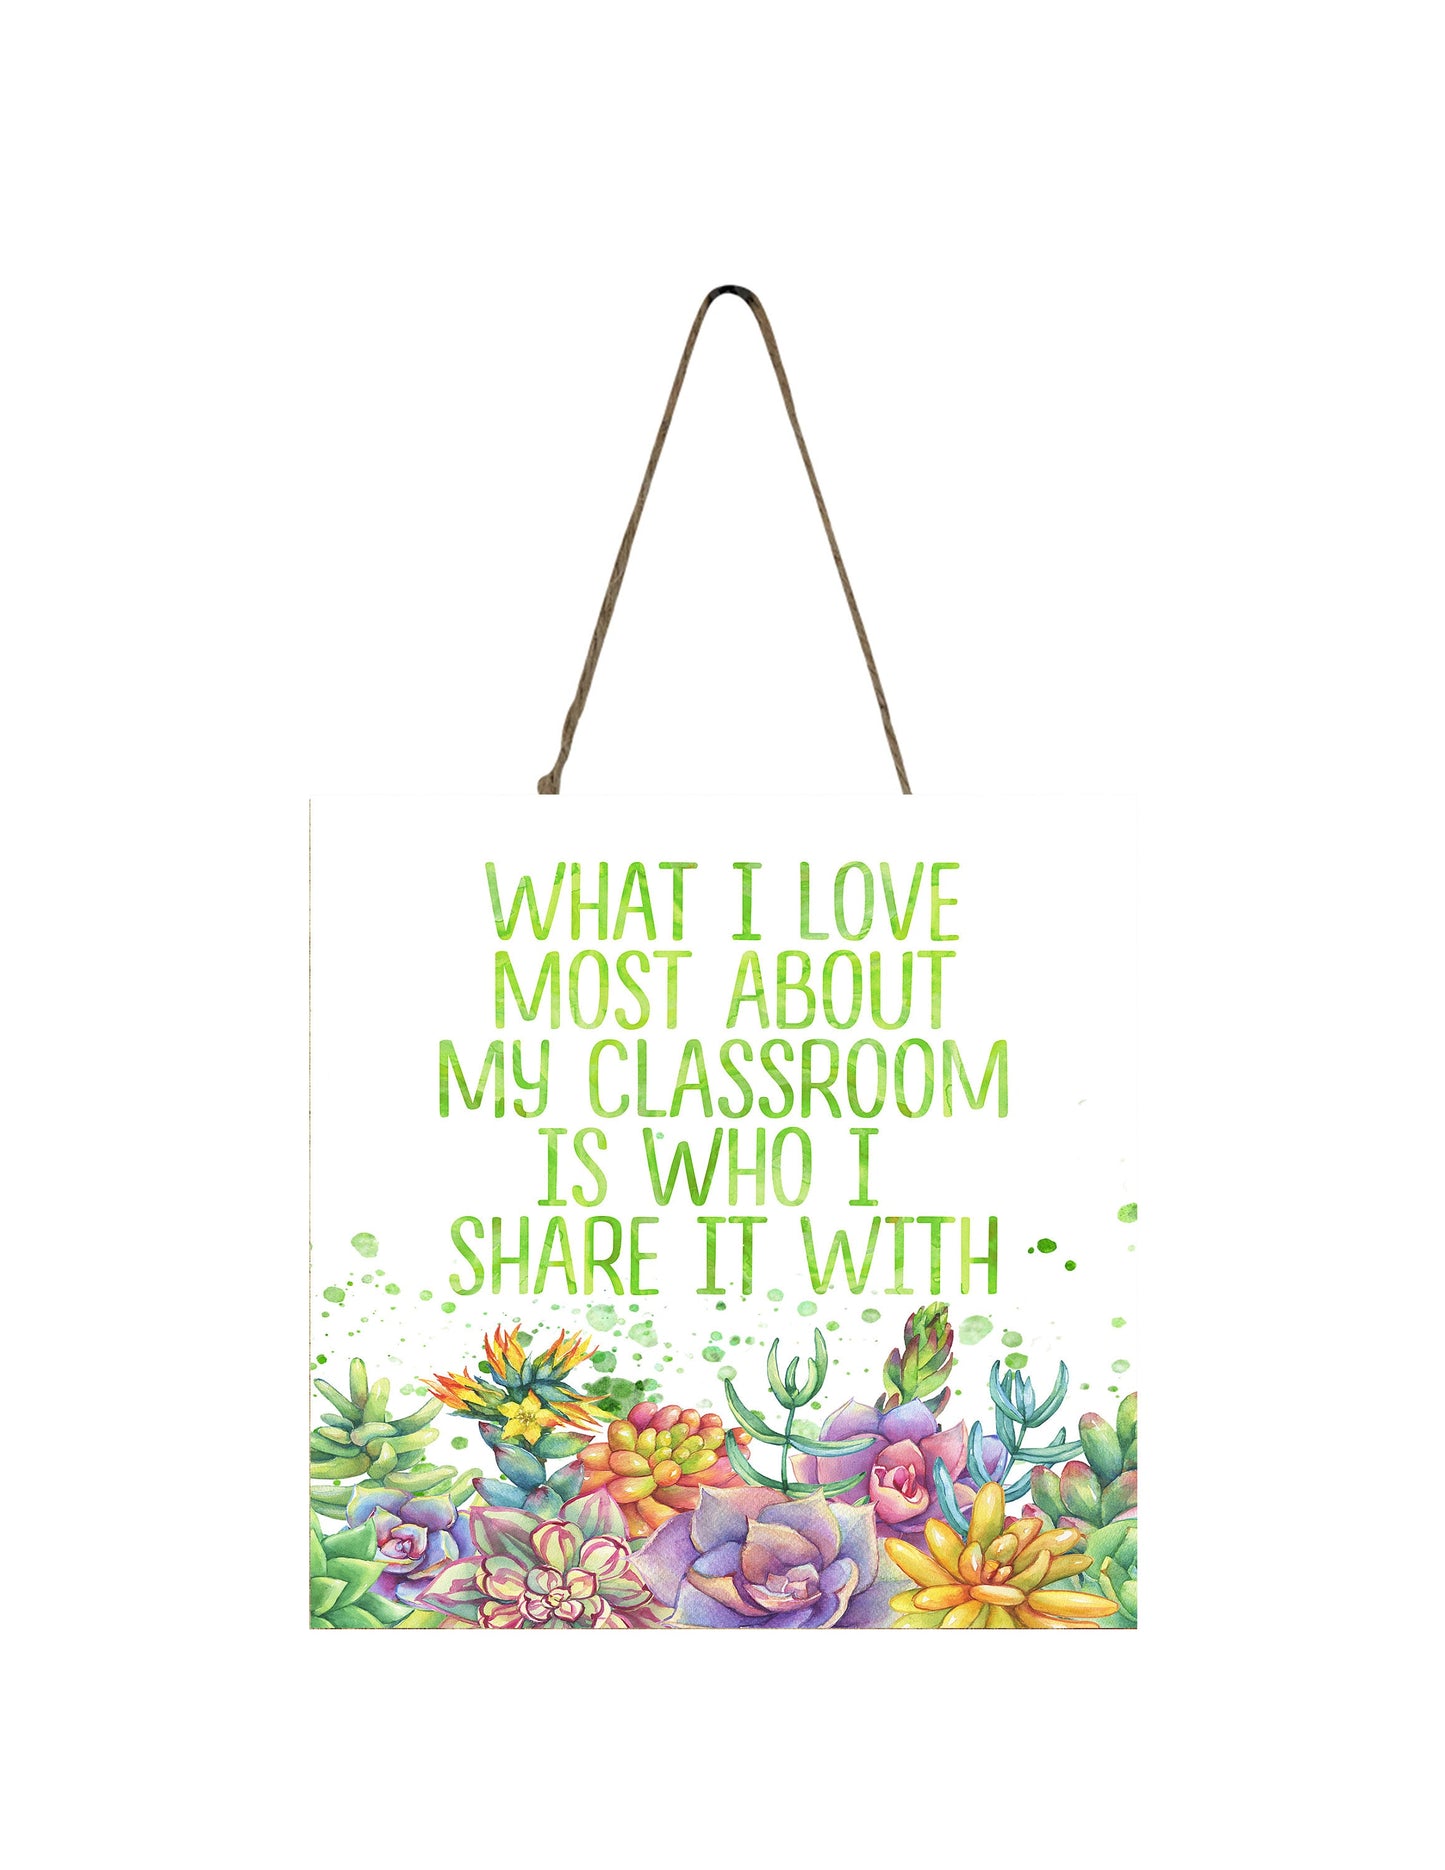 What I Love Most About My Classroom is Who I Share it With Printed Handmade Wood Small Sign